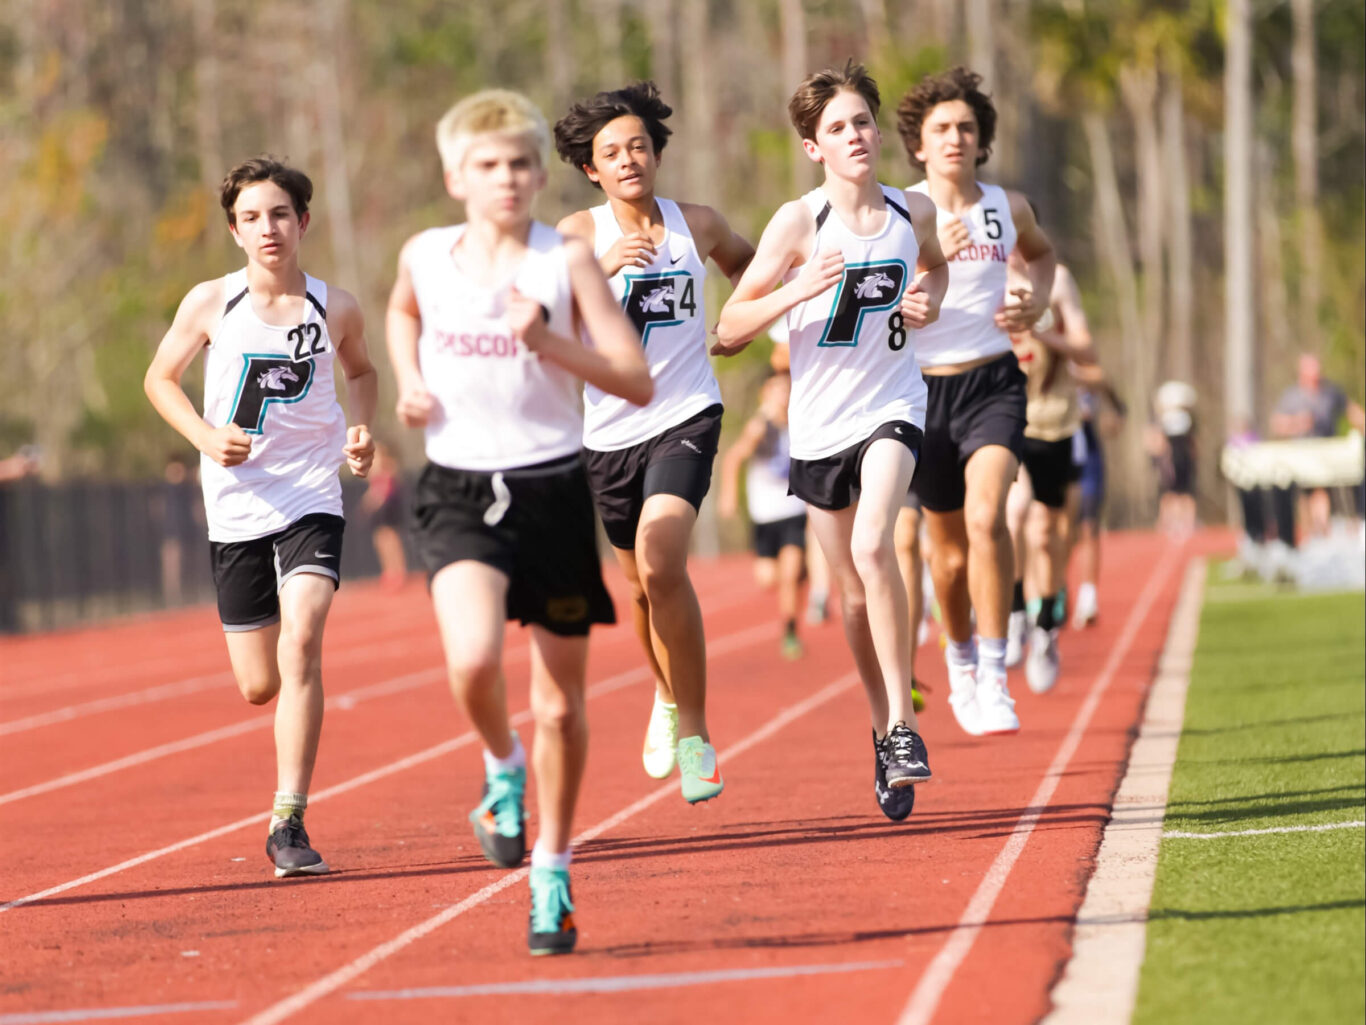 A group of boys running on a track.